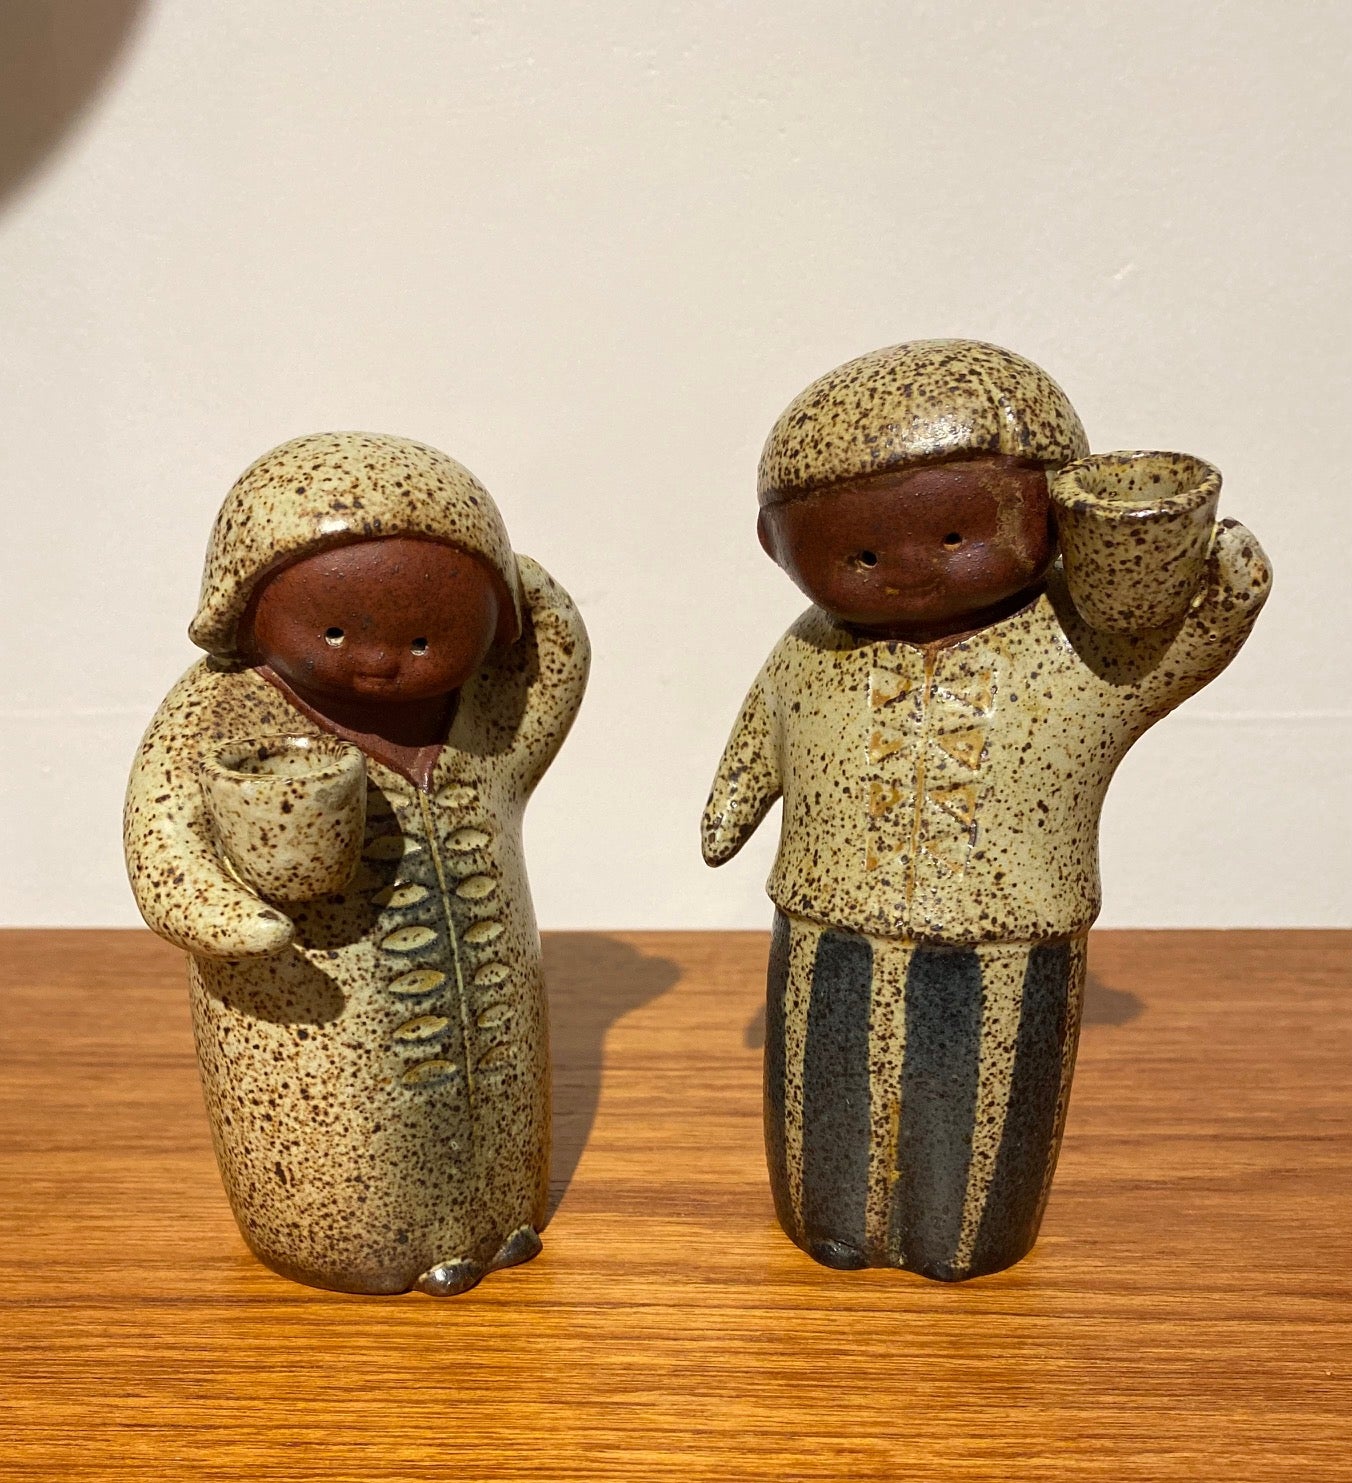 Japanese UCTCI Salt and Pepper Shakers- Cook Street Vintage